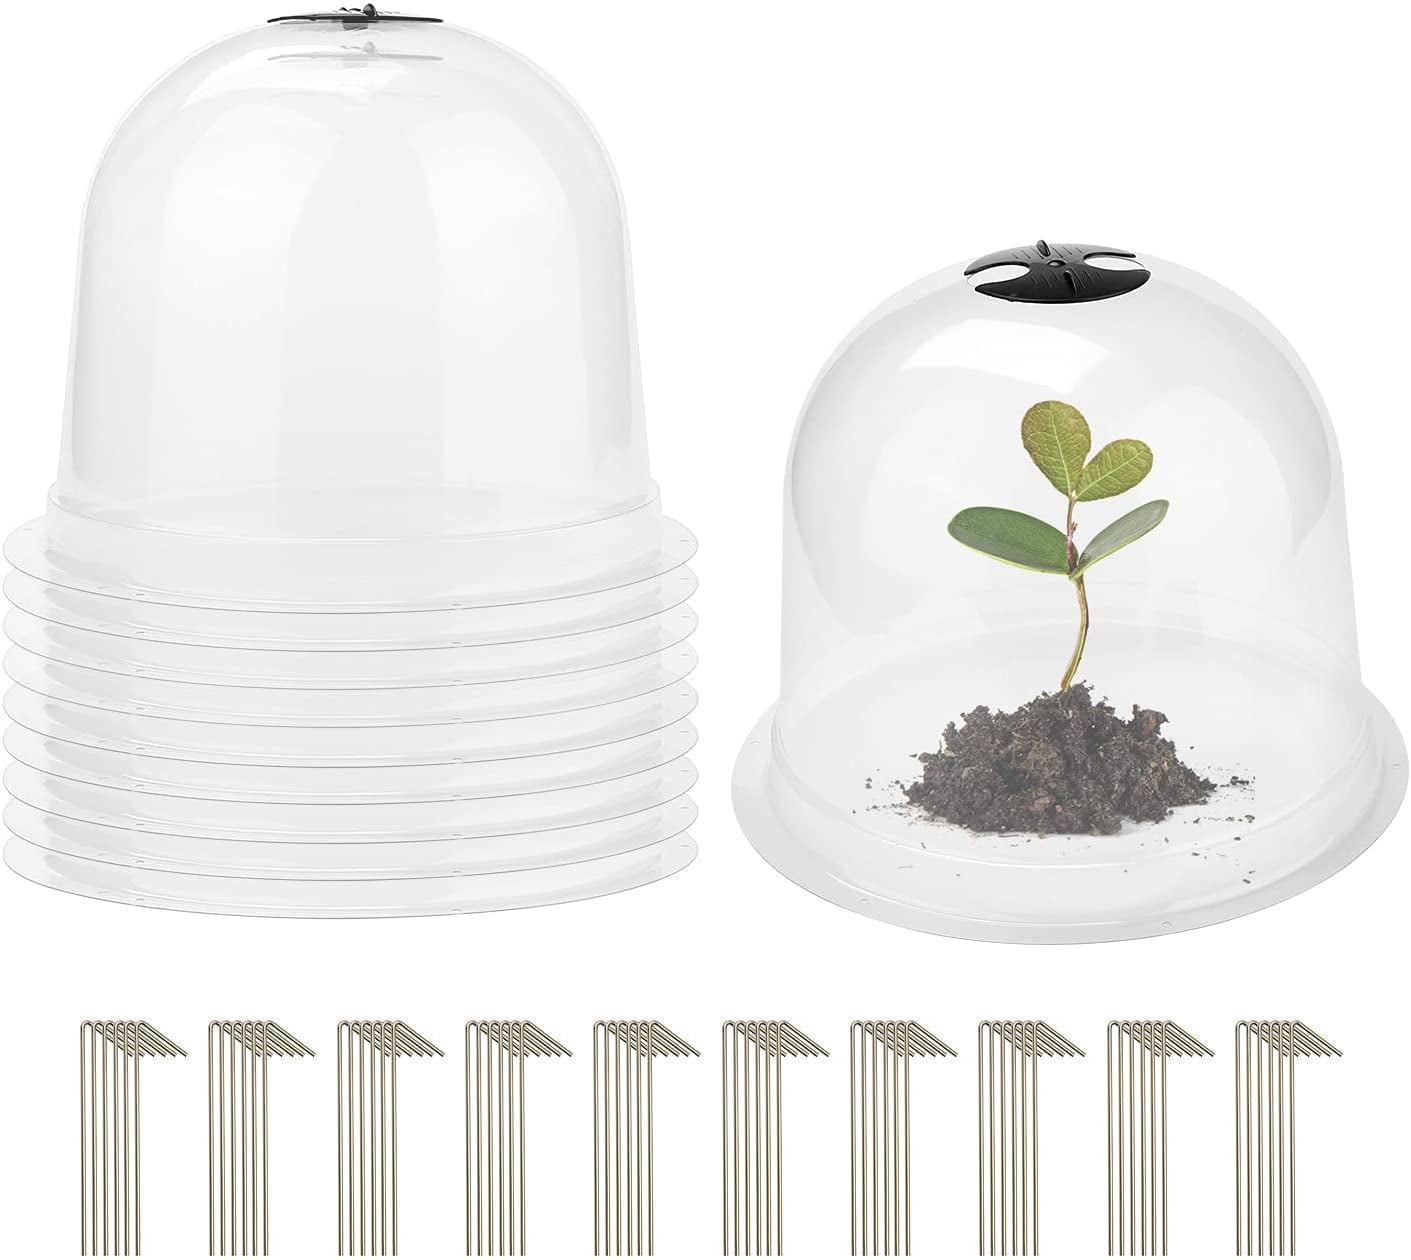 Dream Lifestyle 3 Packs Garden Cloche Dome Plant Bell Protector Covers ...